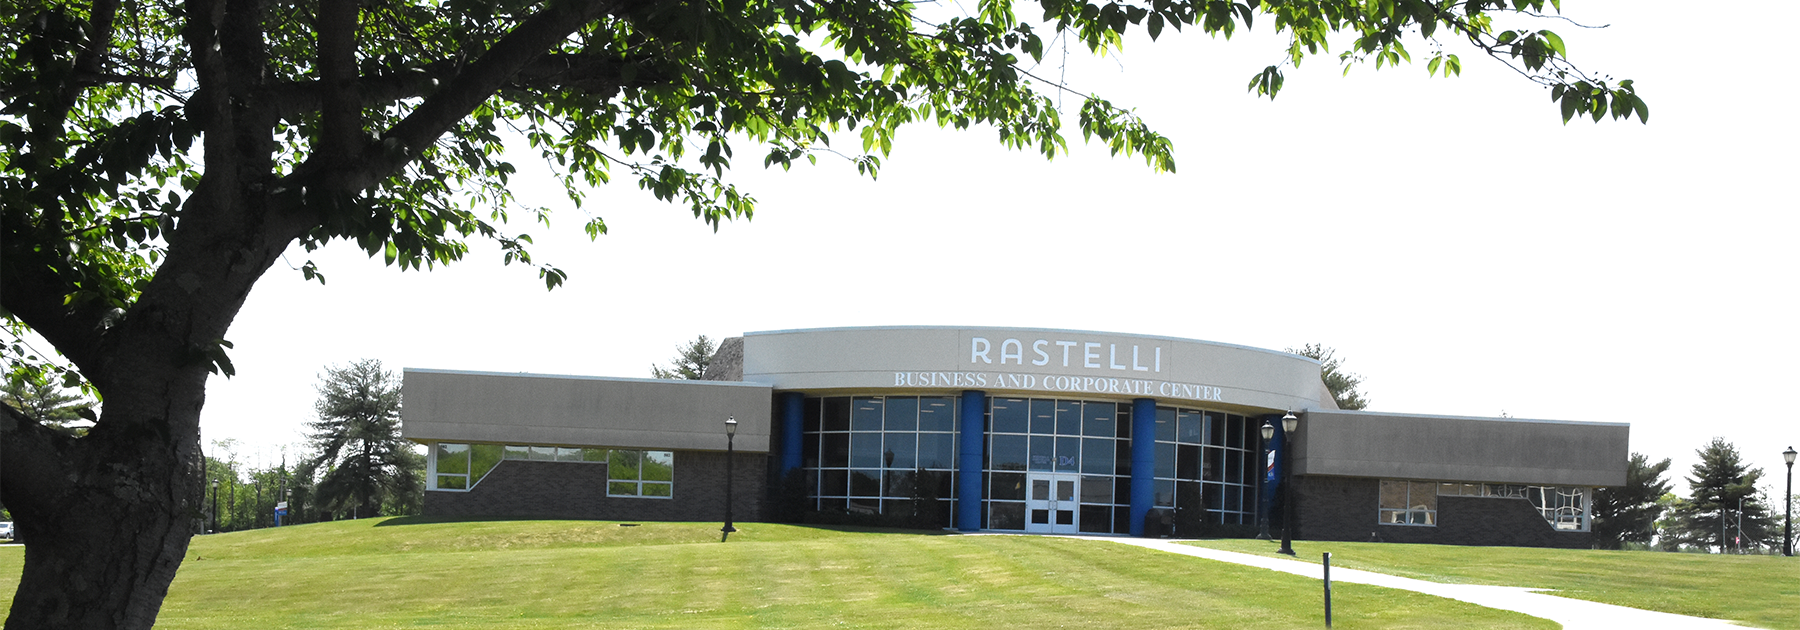 View of RCSJ's Rastelli Business and Corporate building